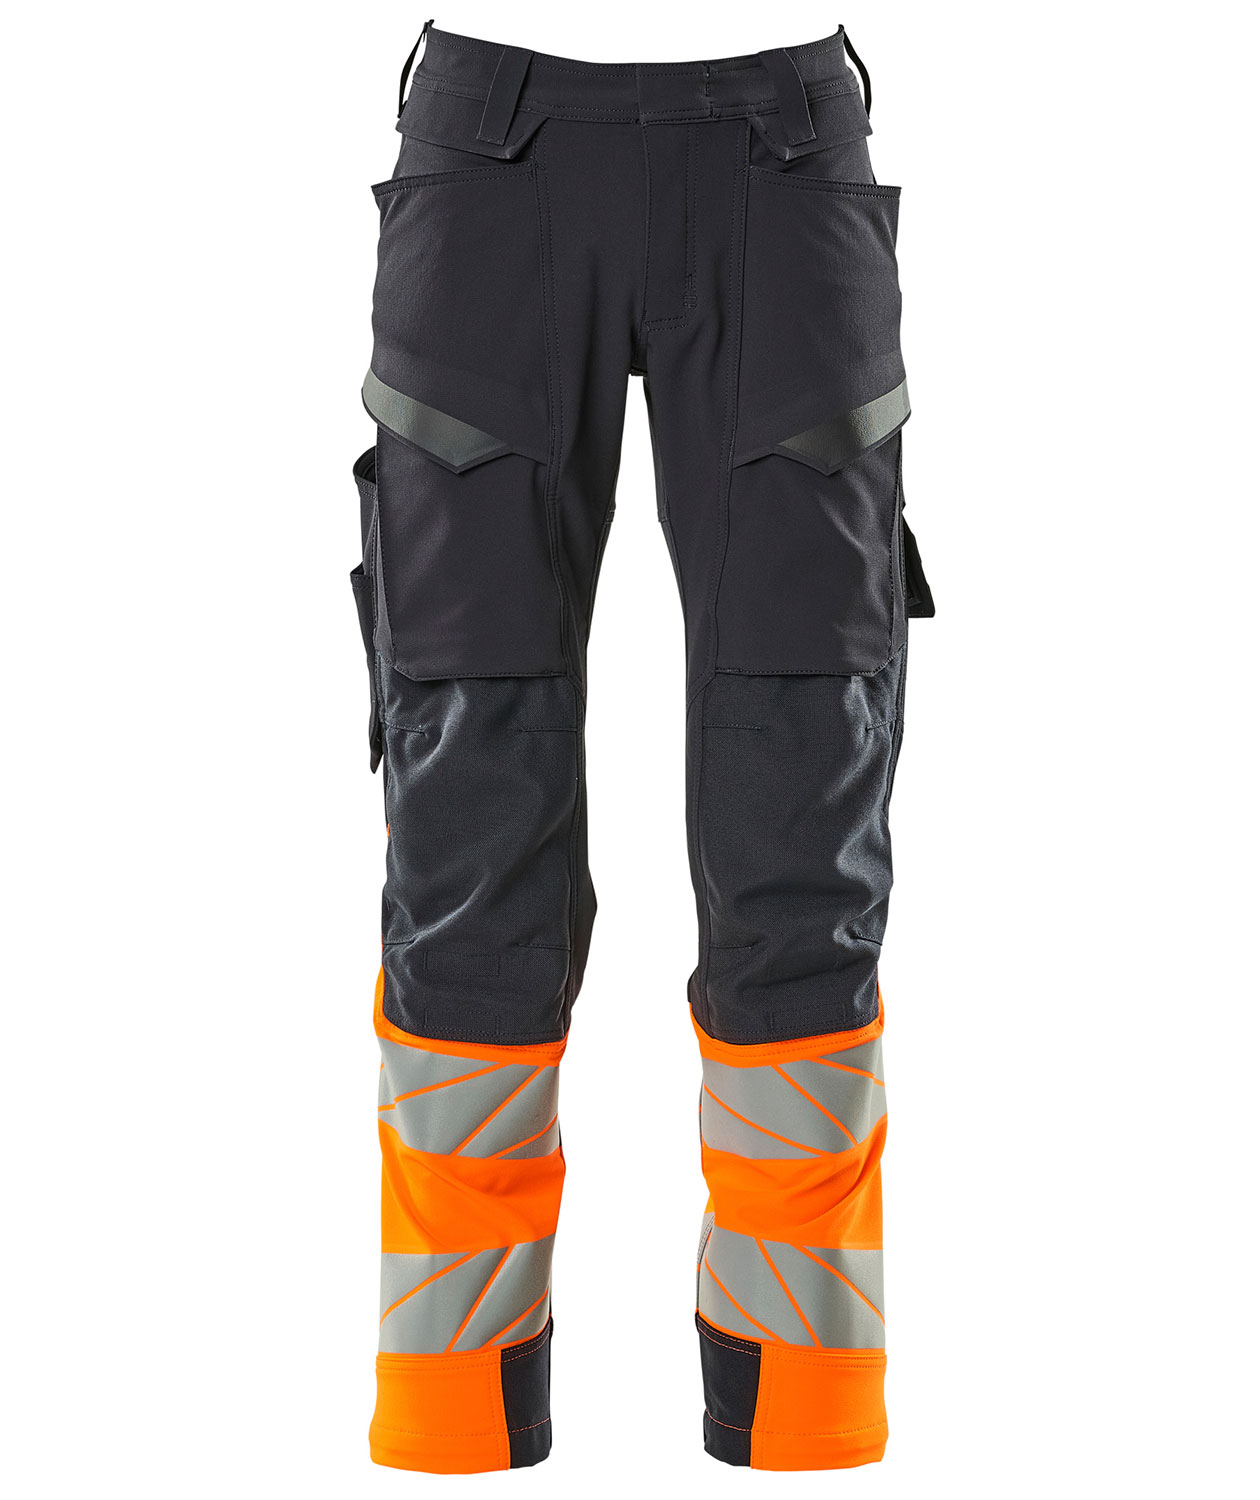 Mascot HiVis Stretch Zone Work Trousers YellowDark Navy Blue Various  Sizes305in Waist  30in Leg  MAD4TOOLSCOM